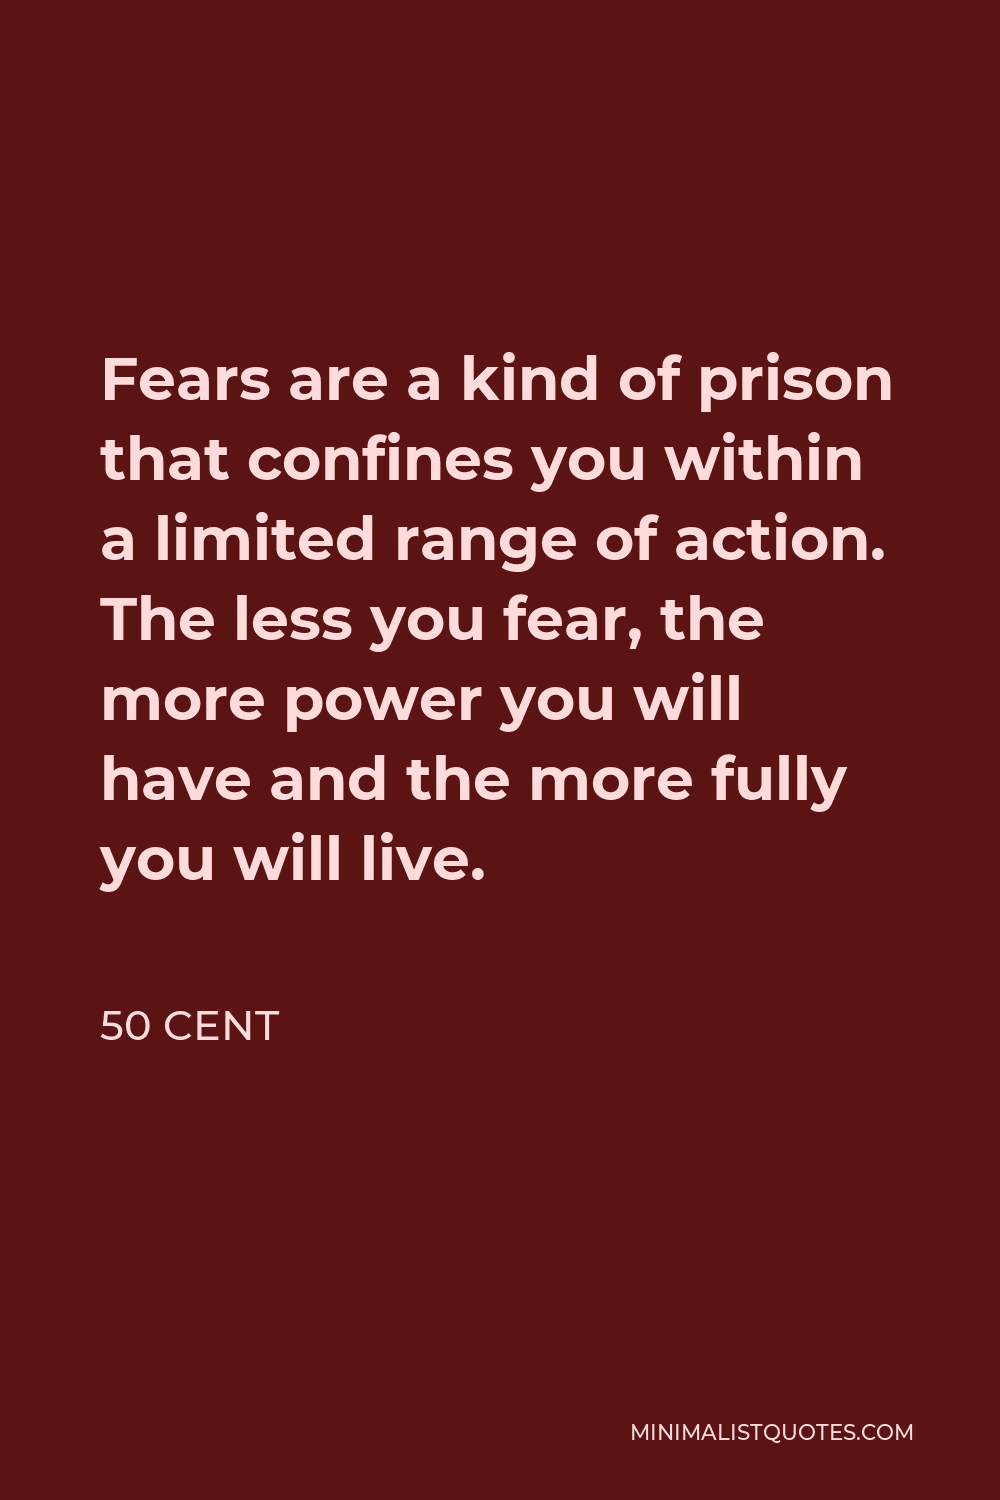 50 Cent Quote - Fears are a kind of prison that confines you within a limited range of action. The less you fear, the more power you will have and the more fully you will live.